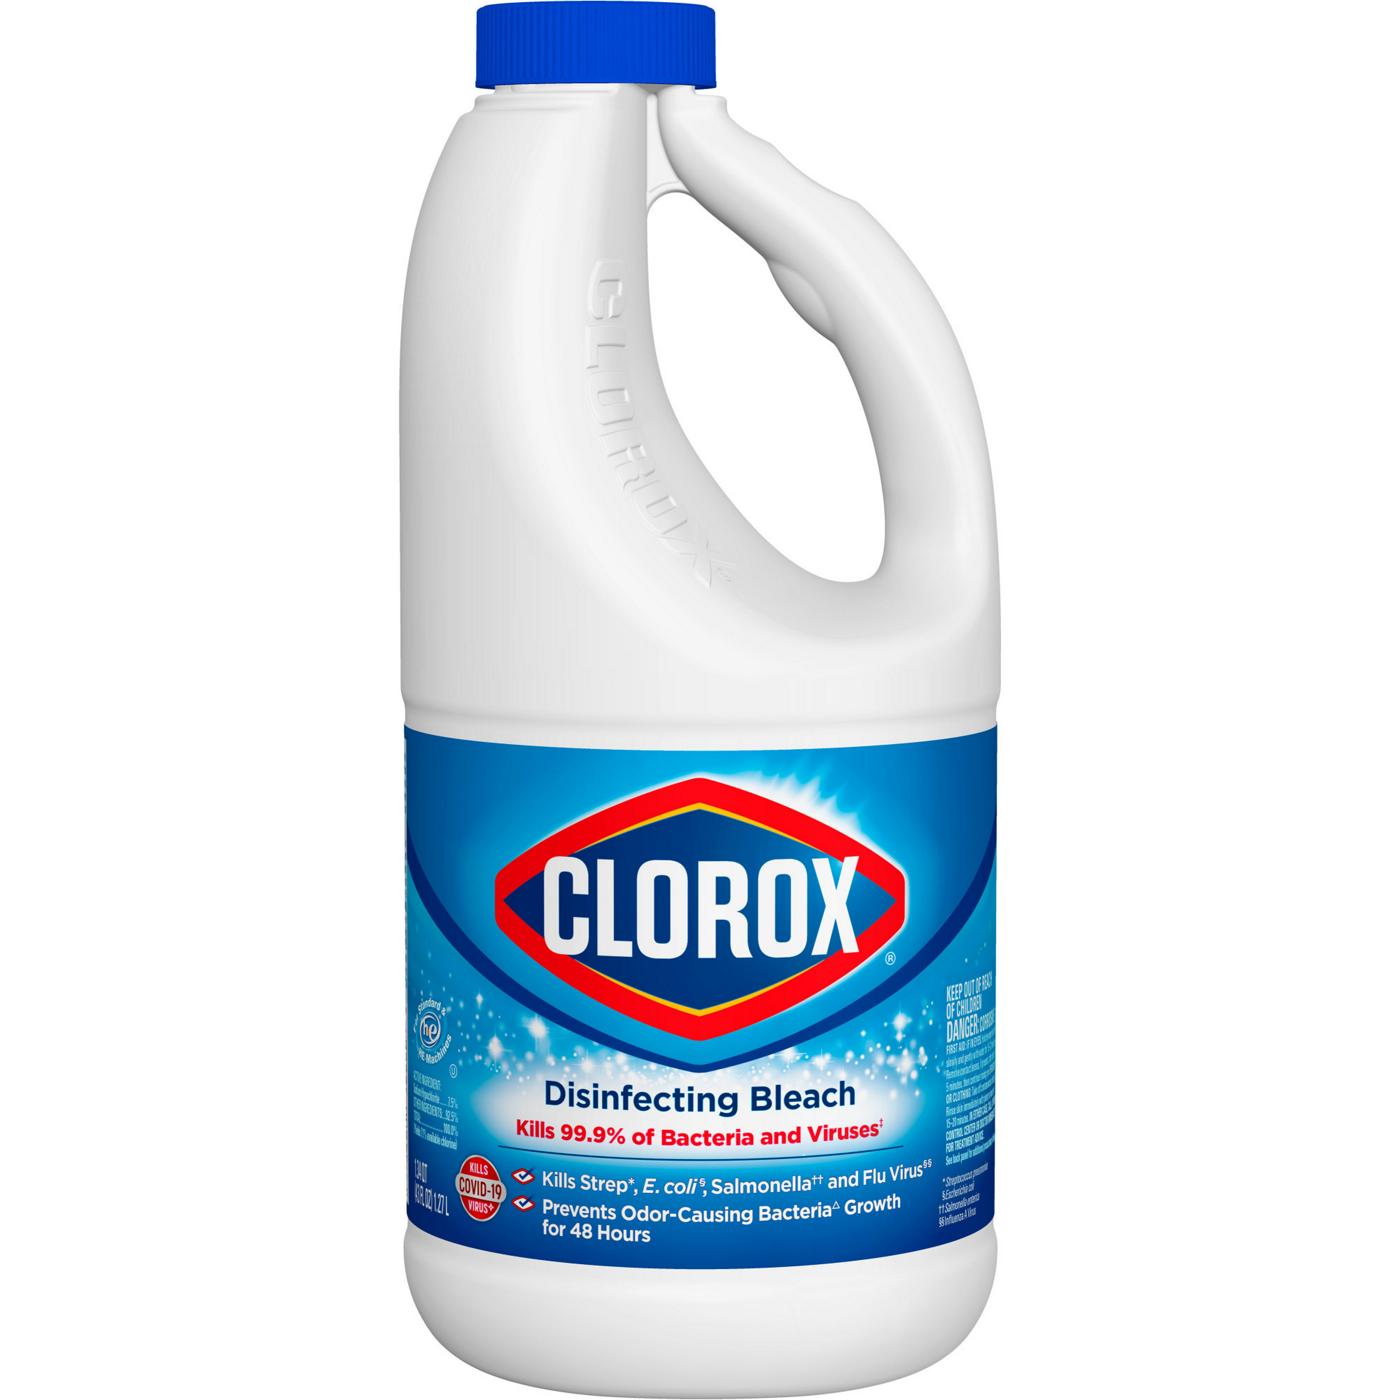 Clorox Disinfecting Bleach; image 1 of 7